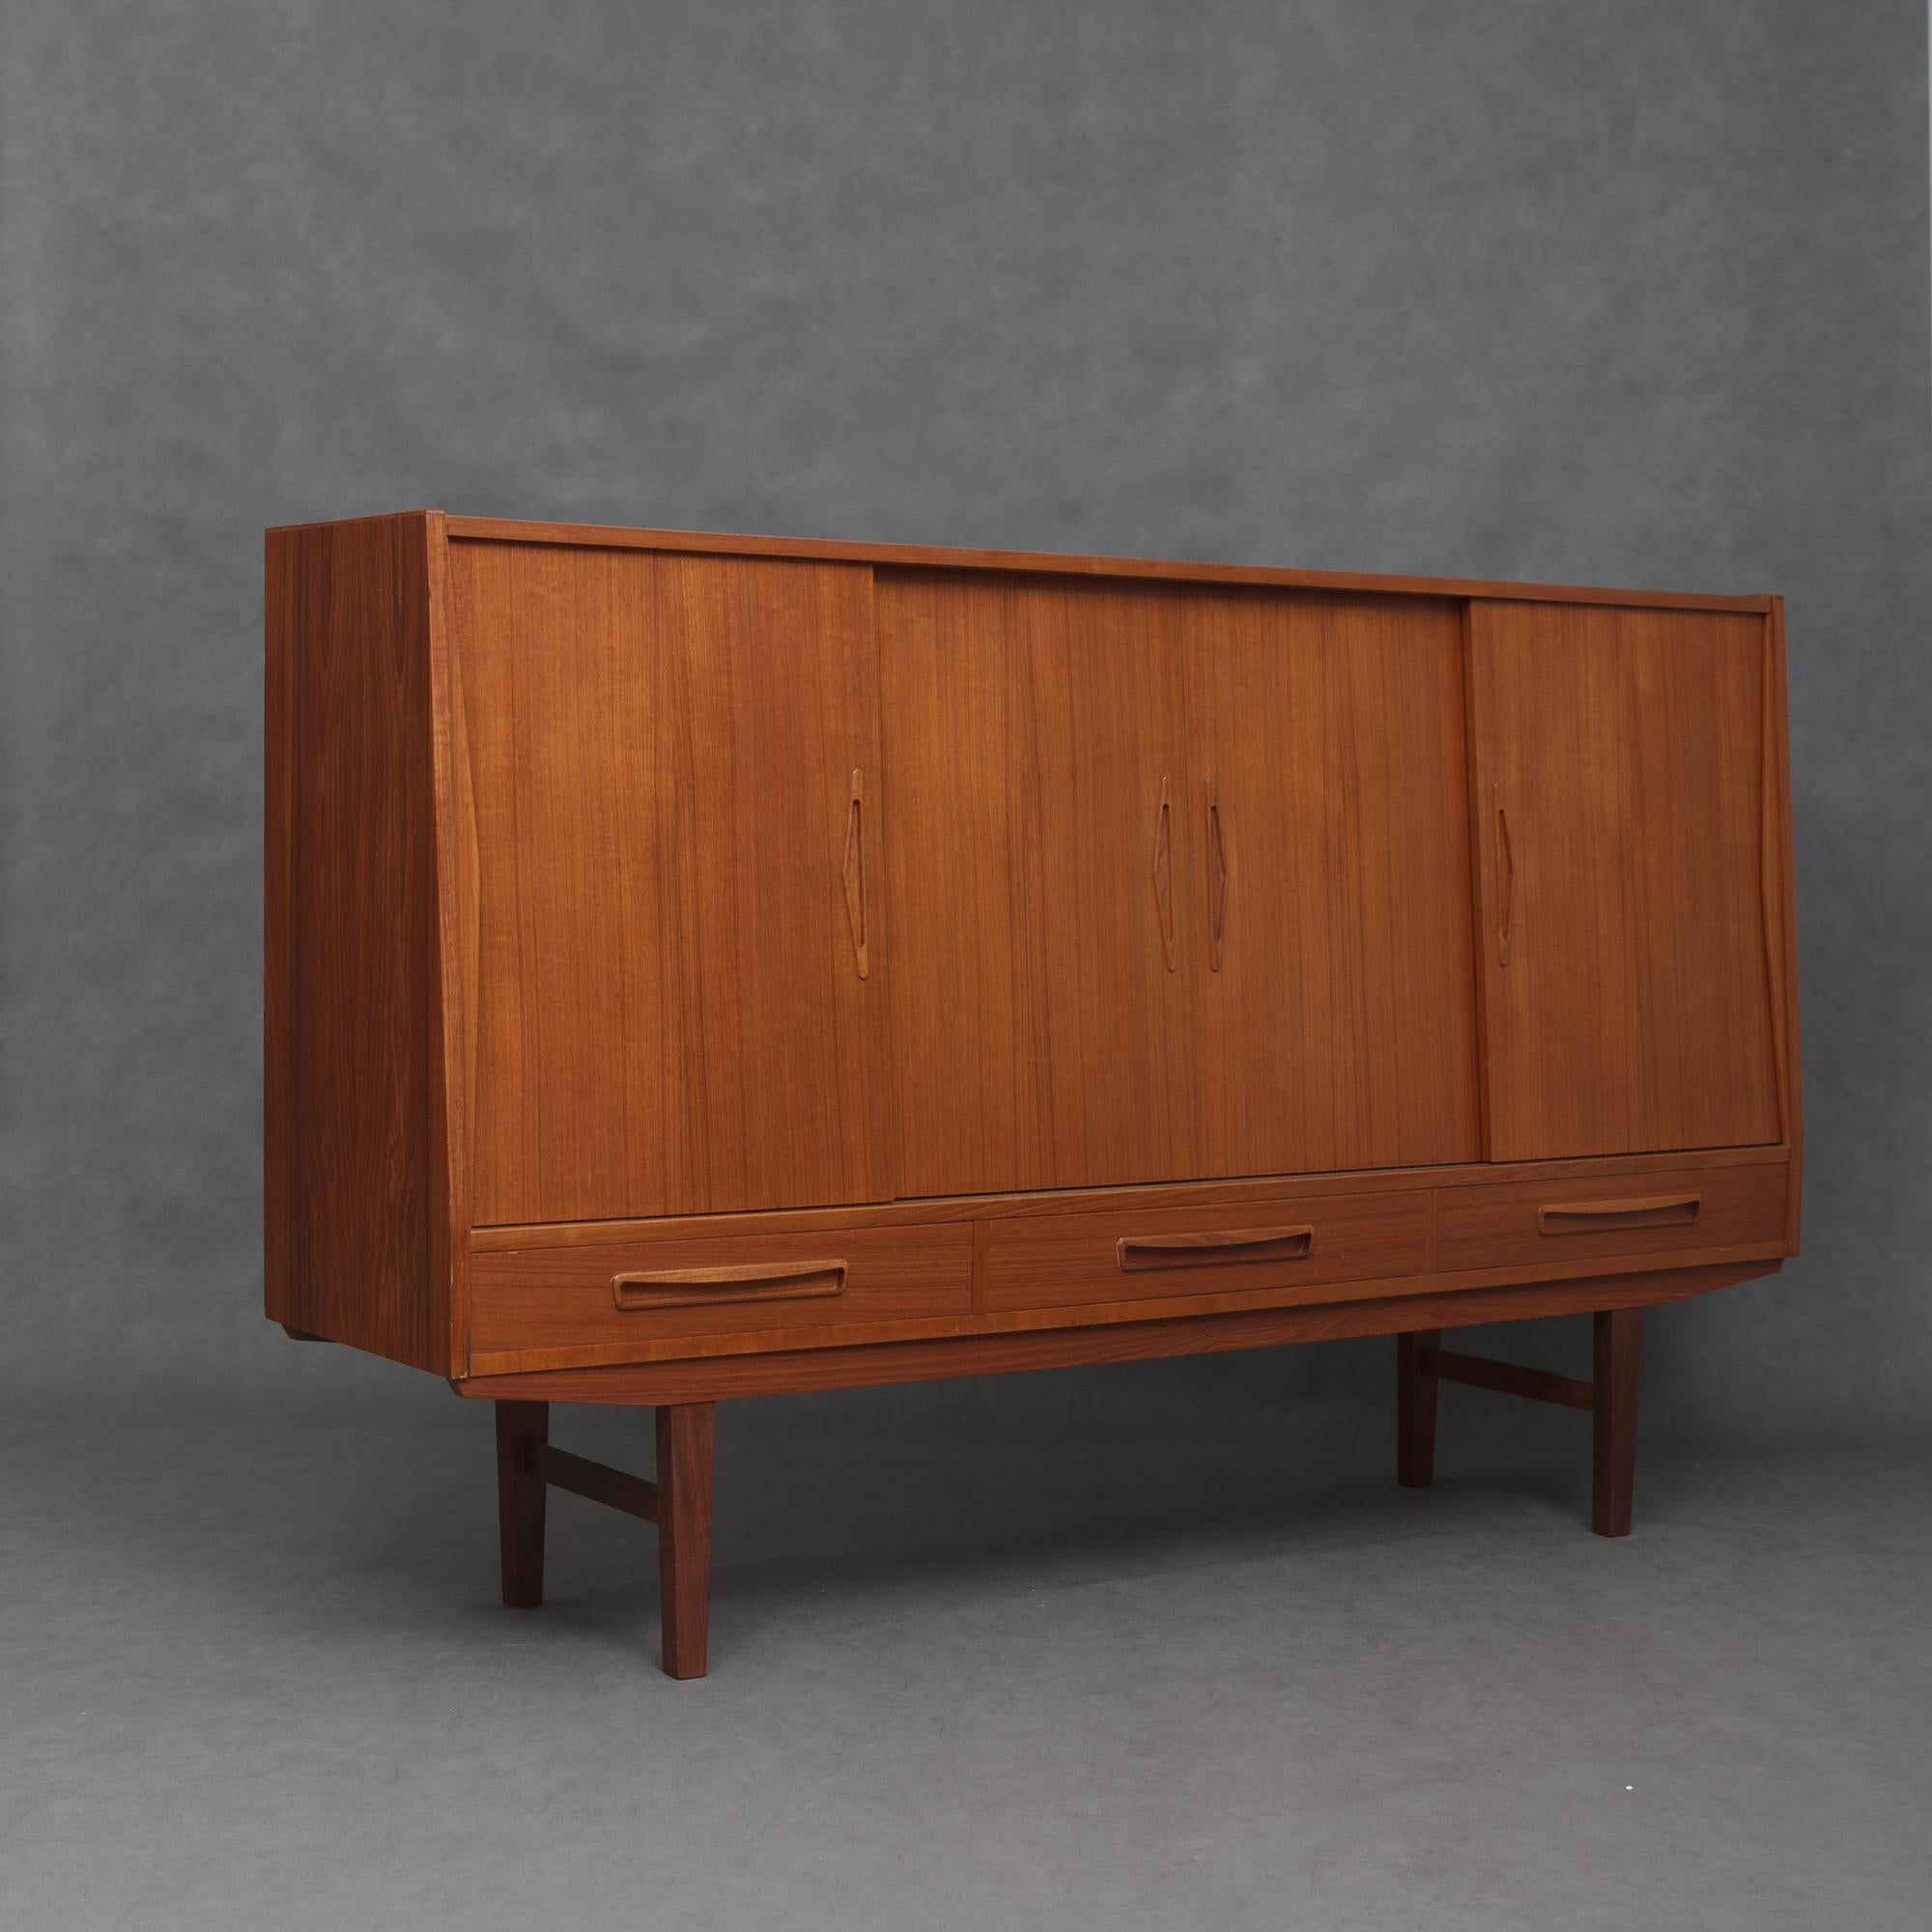 Danish Teak Highboard with a Lighted Bar from 1960s For Sale 1